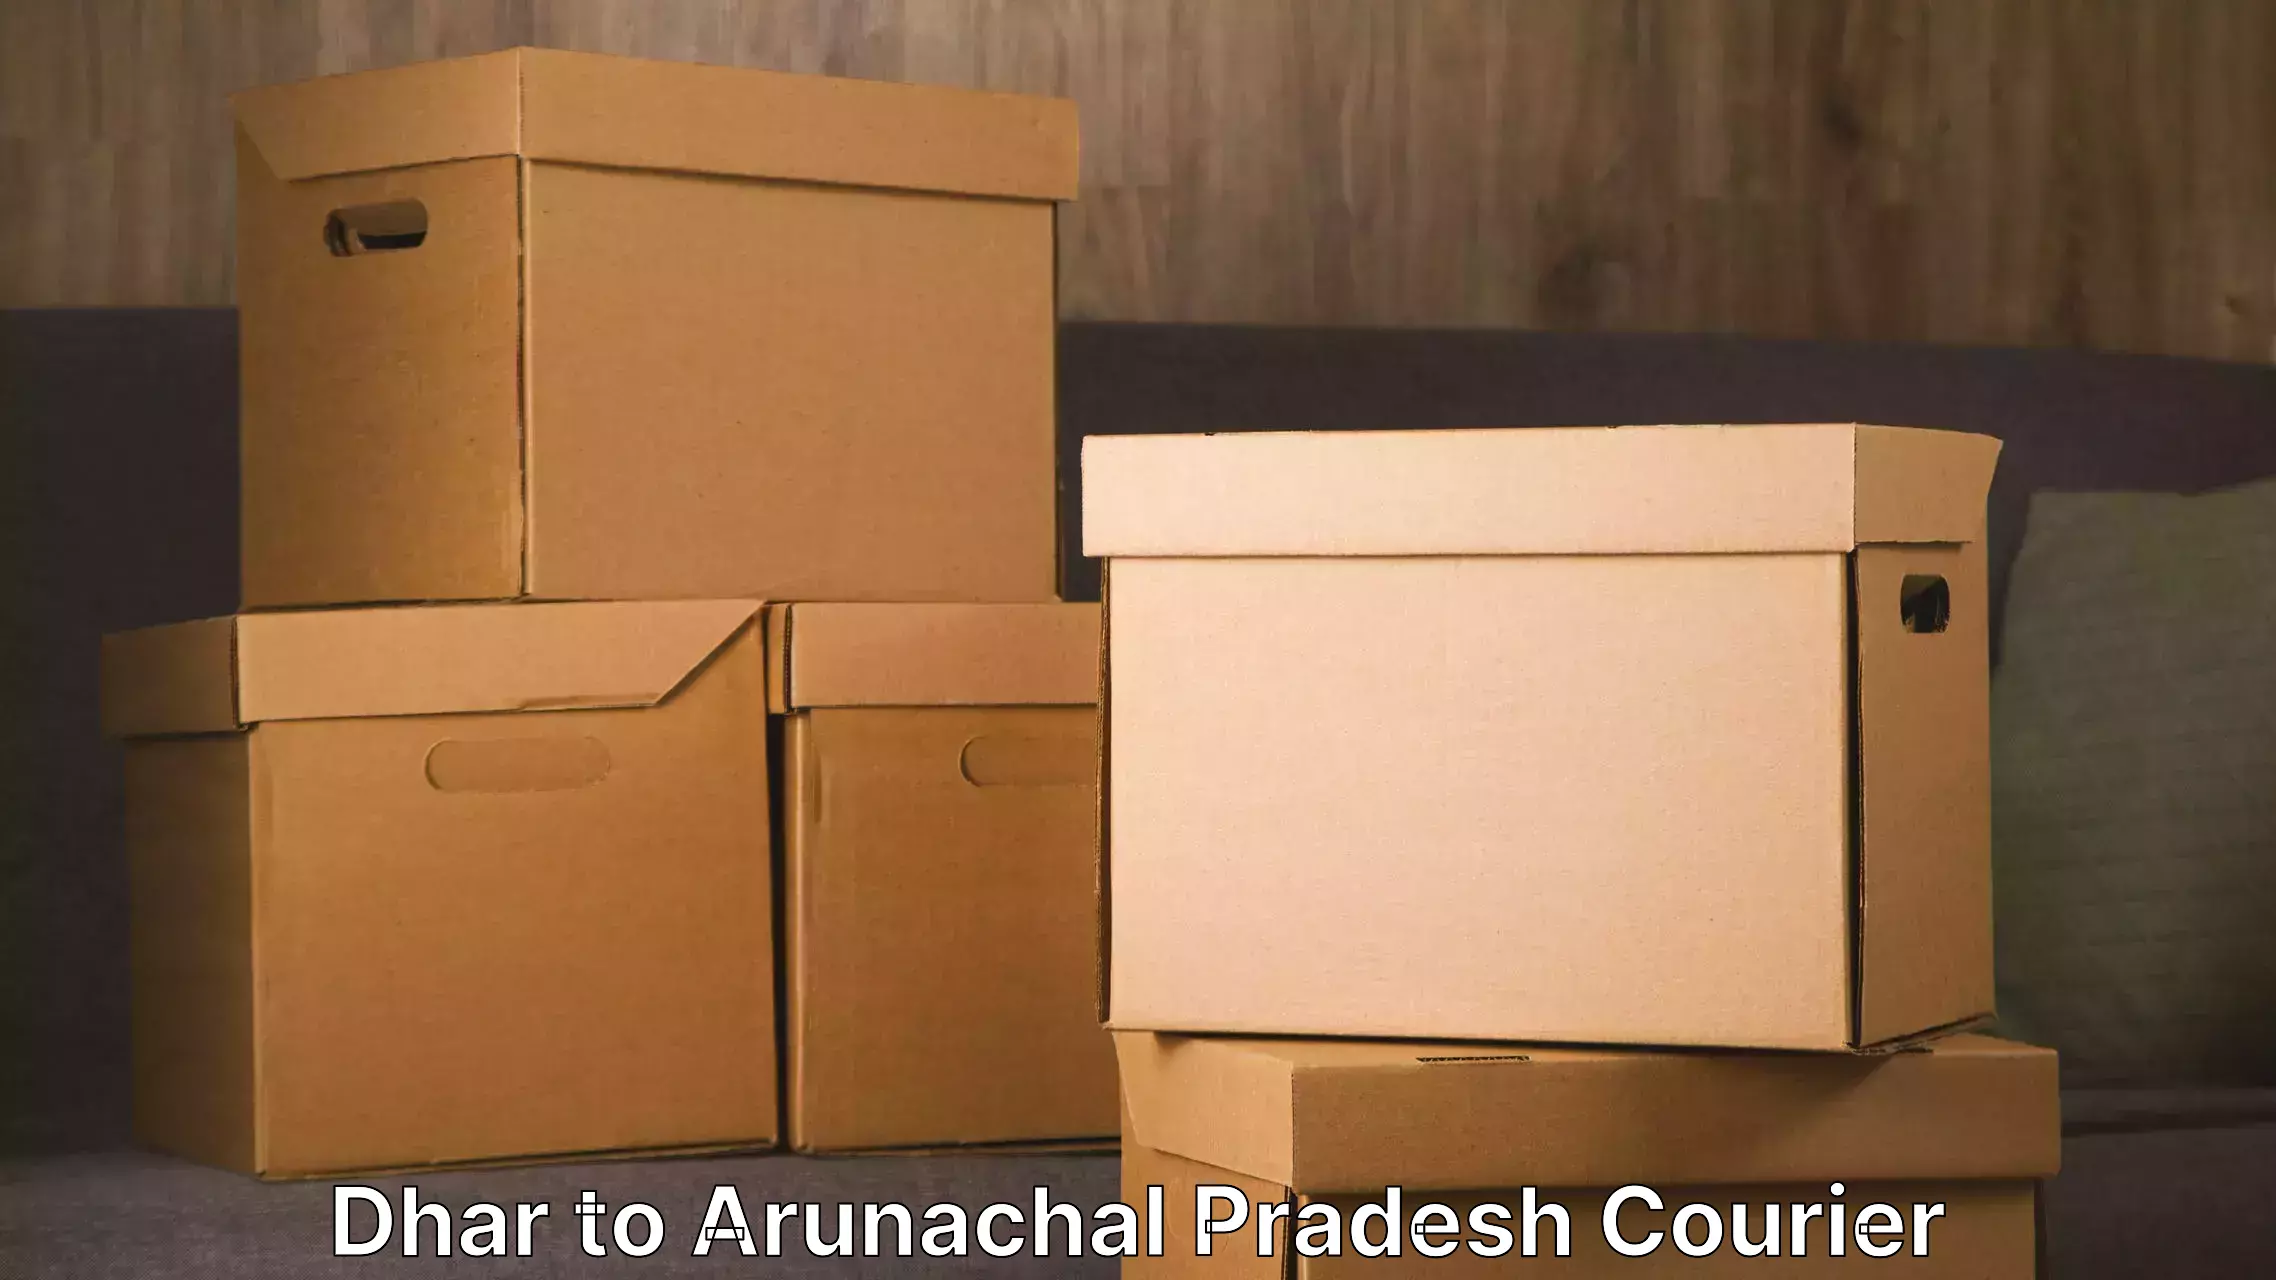 Professional moving company Dhar to Naharlagun